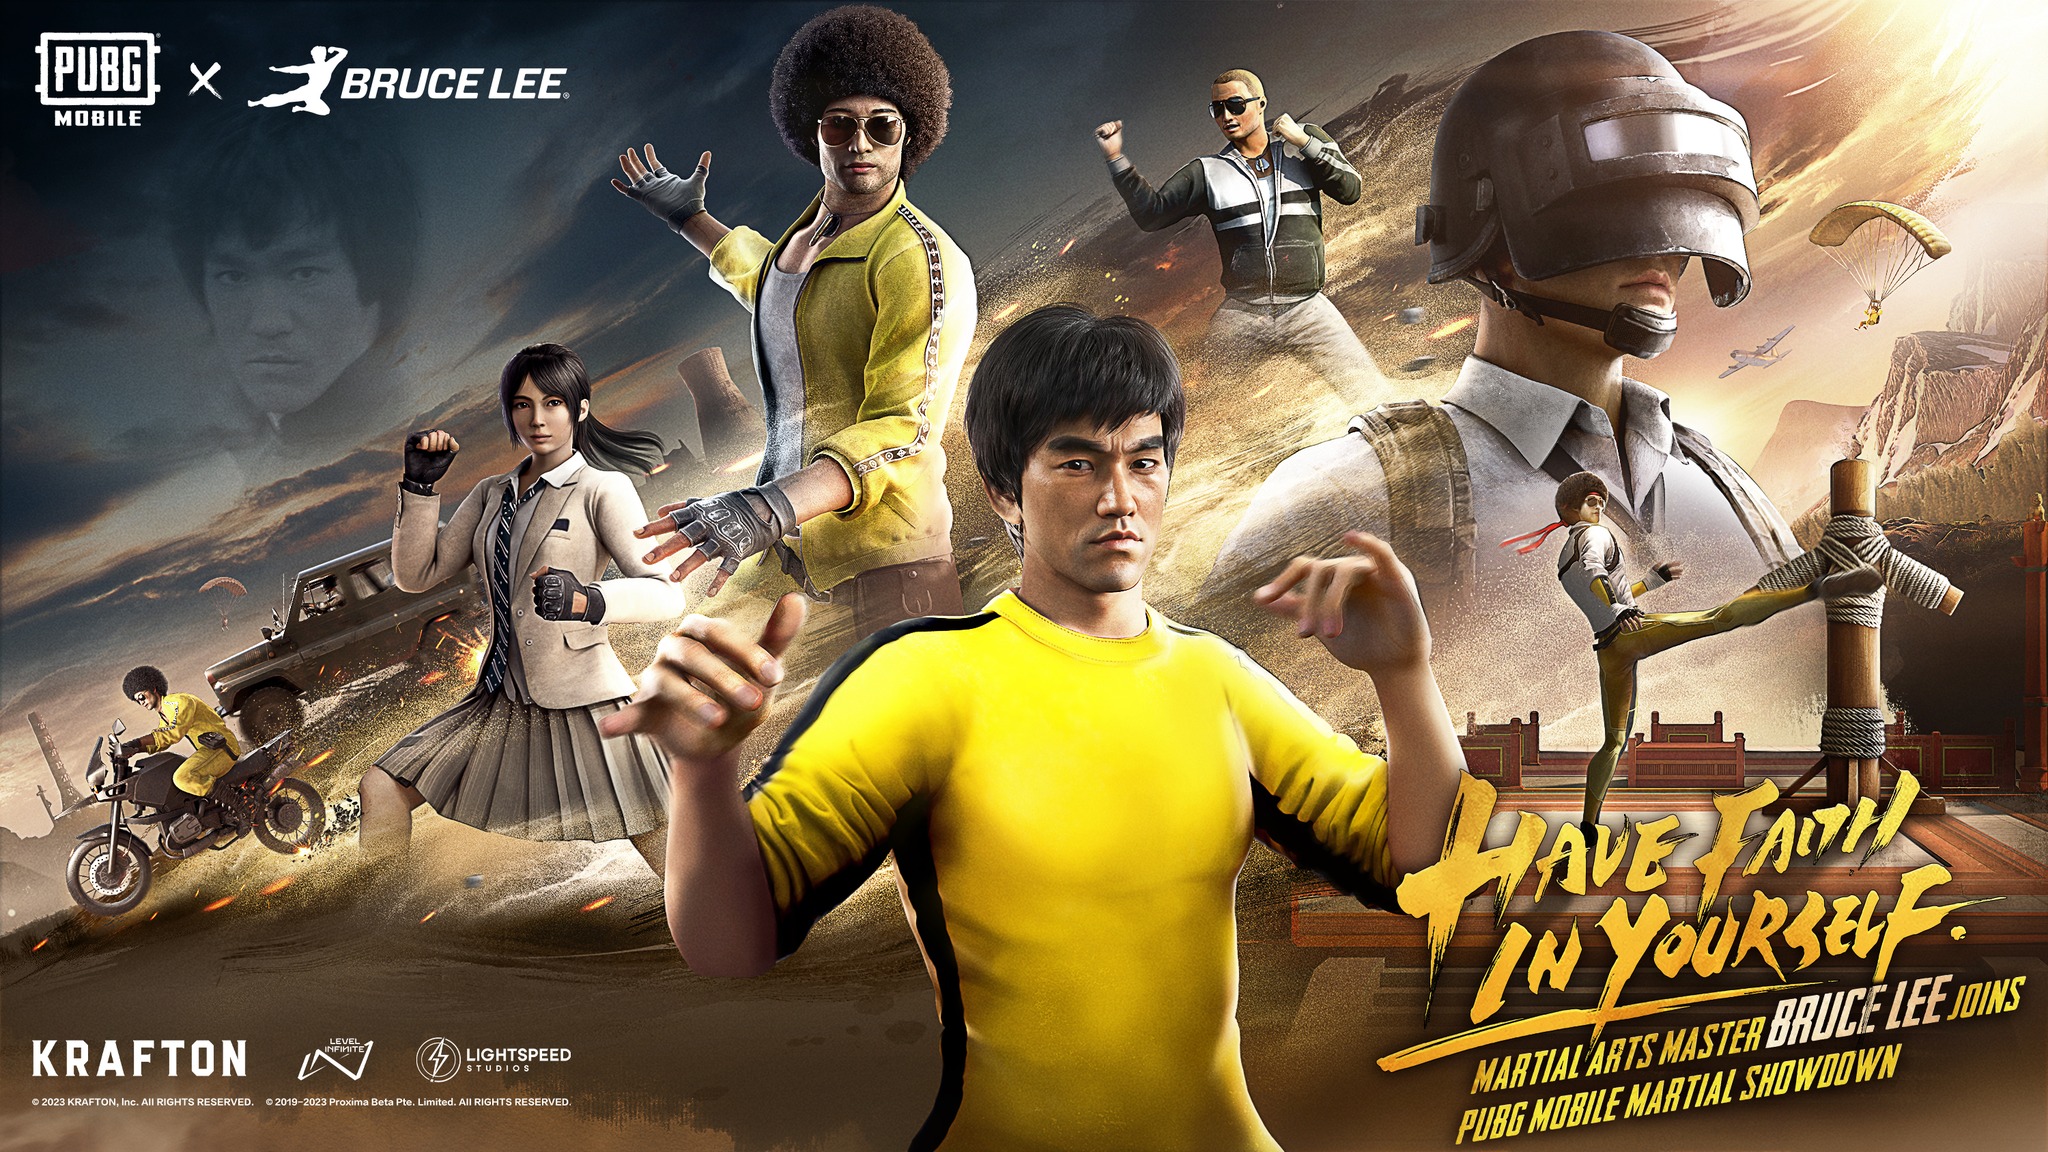 PUBG Mobile x Bruce Lee collaboration brings exclusive in-game challenges and items PC